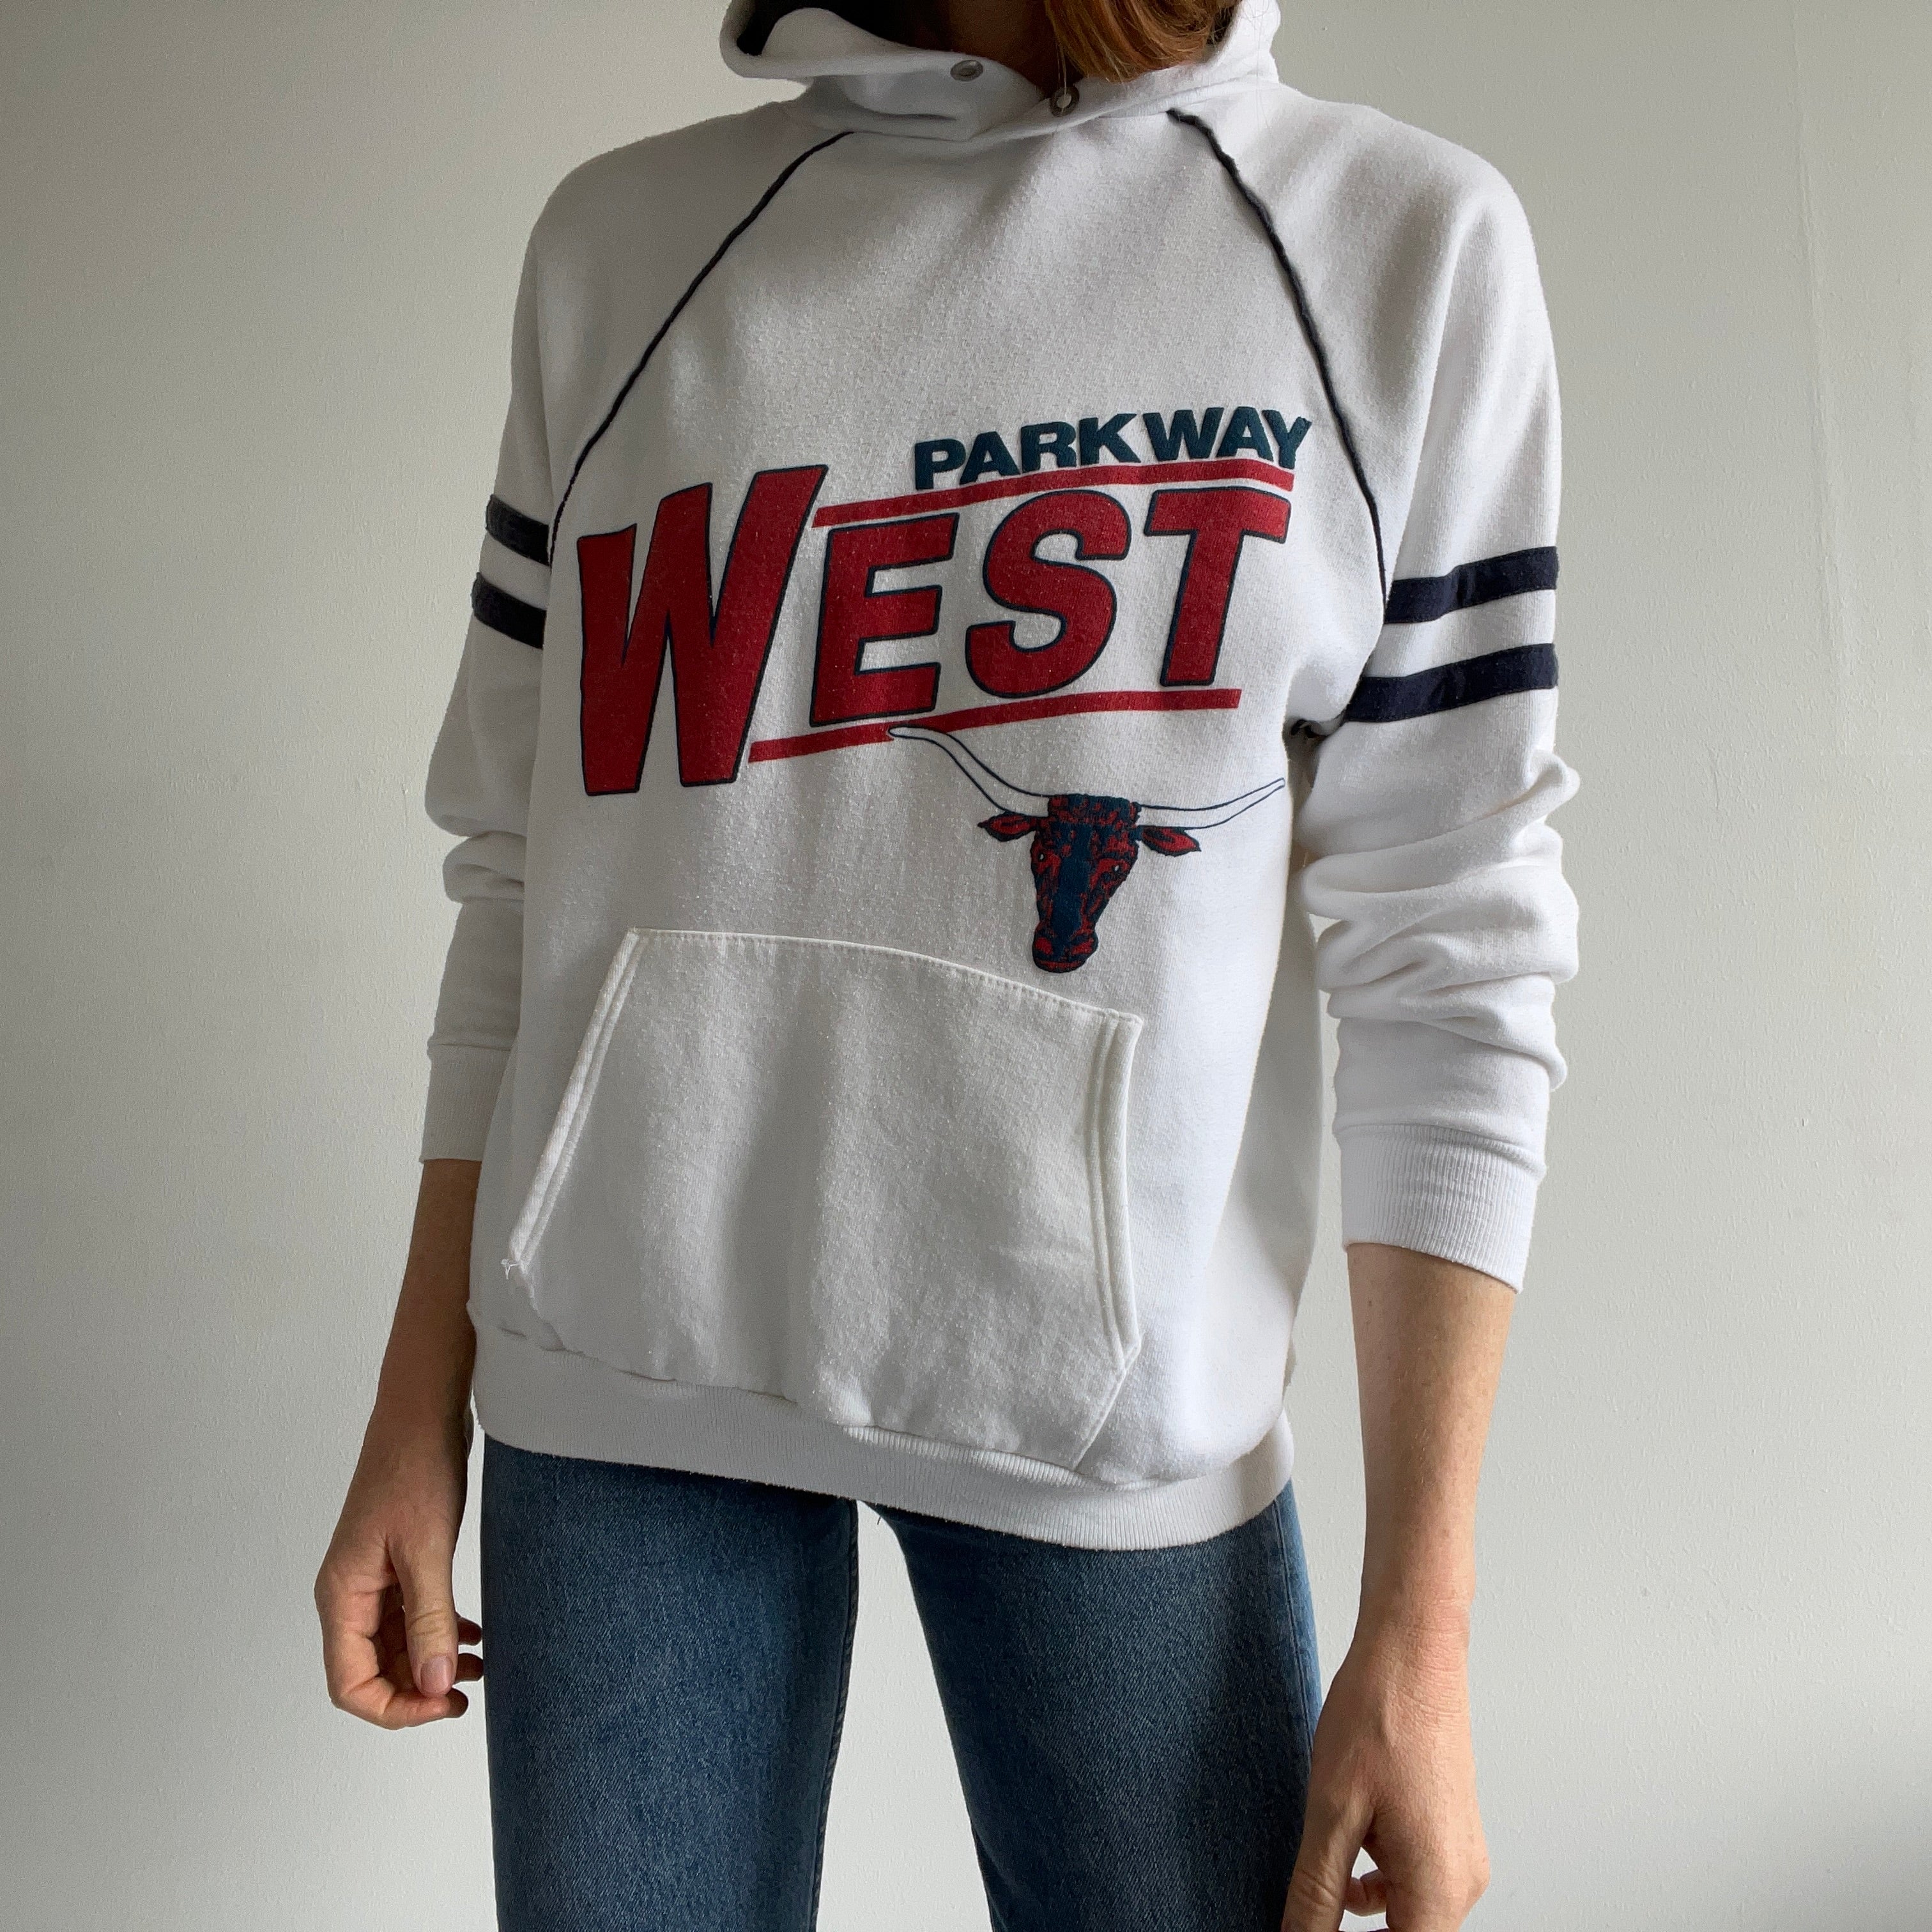 1980s Parkway West Hoodie with Double Stripes and a Contrast Hood